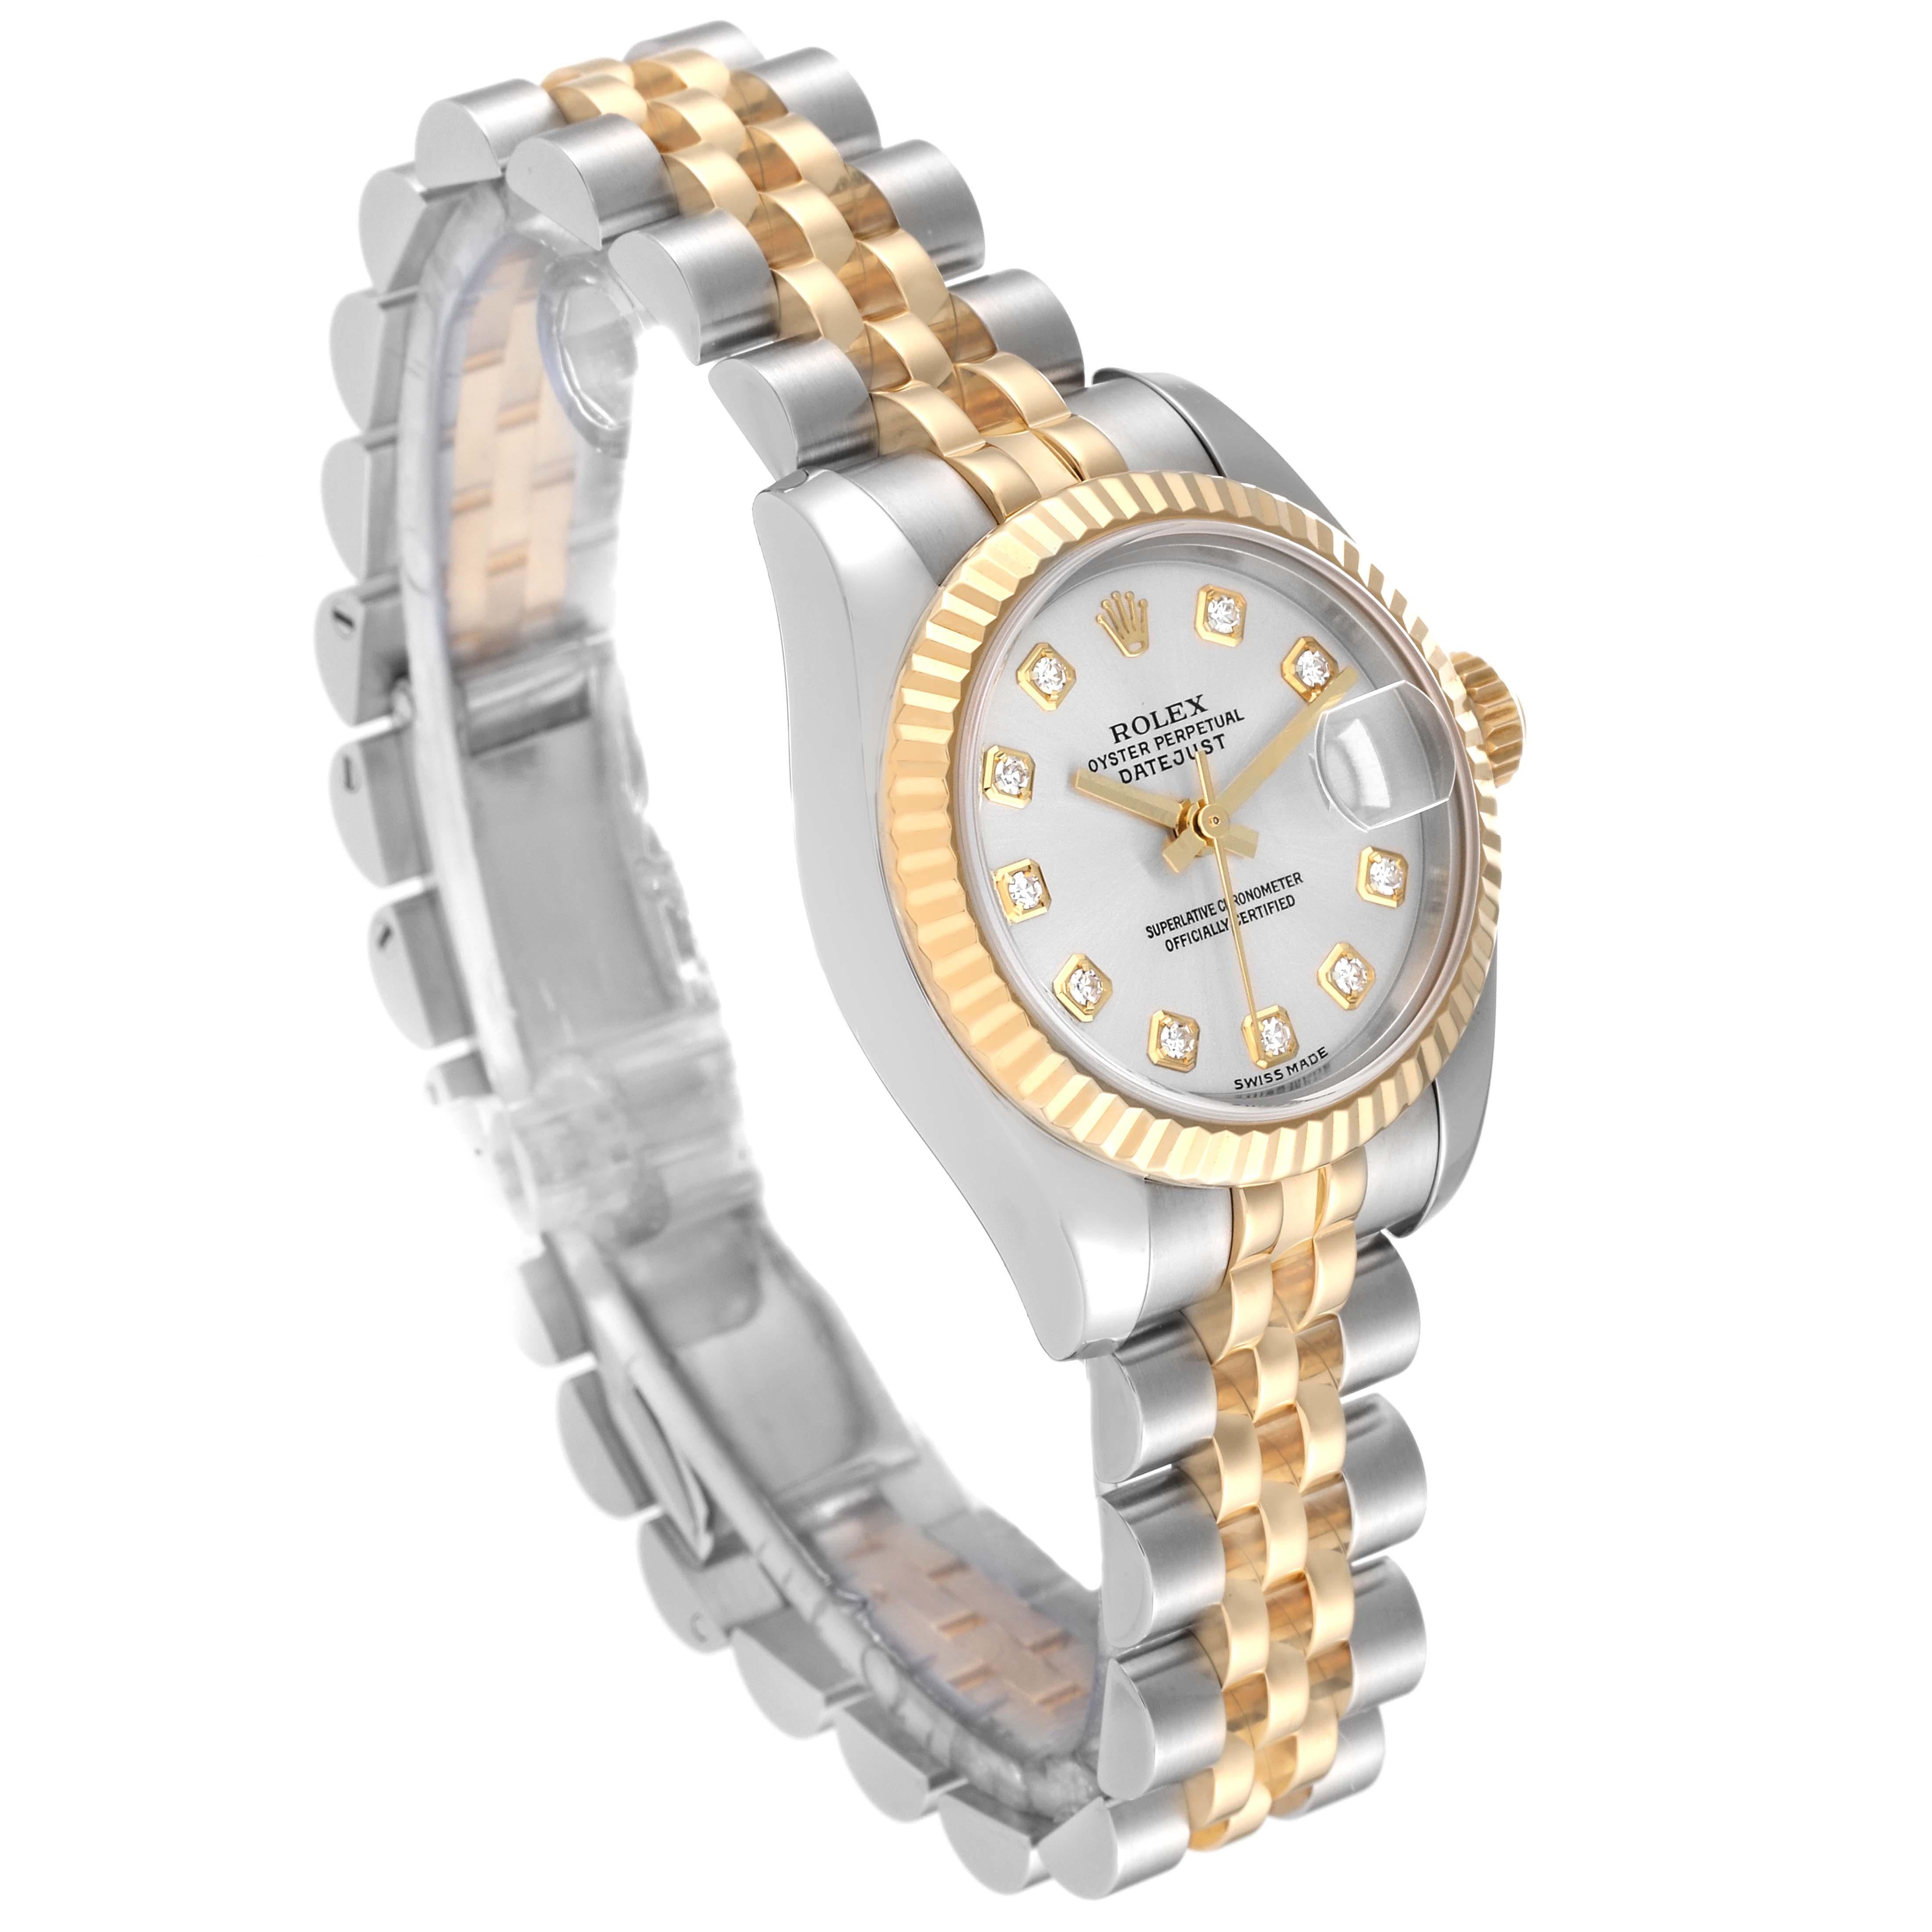 Rolex Datejust 26 Steel Yellow Gold Diamond Dial Ladies Watch 179173 For Sale 6